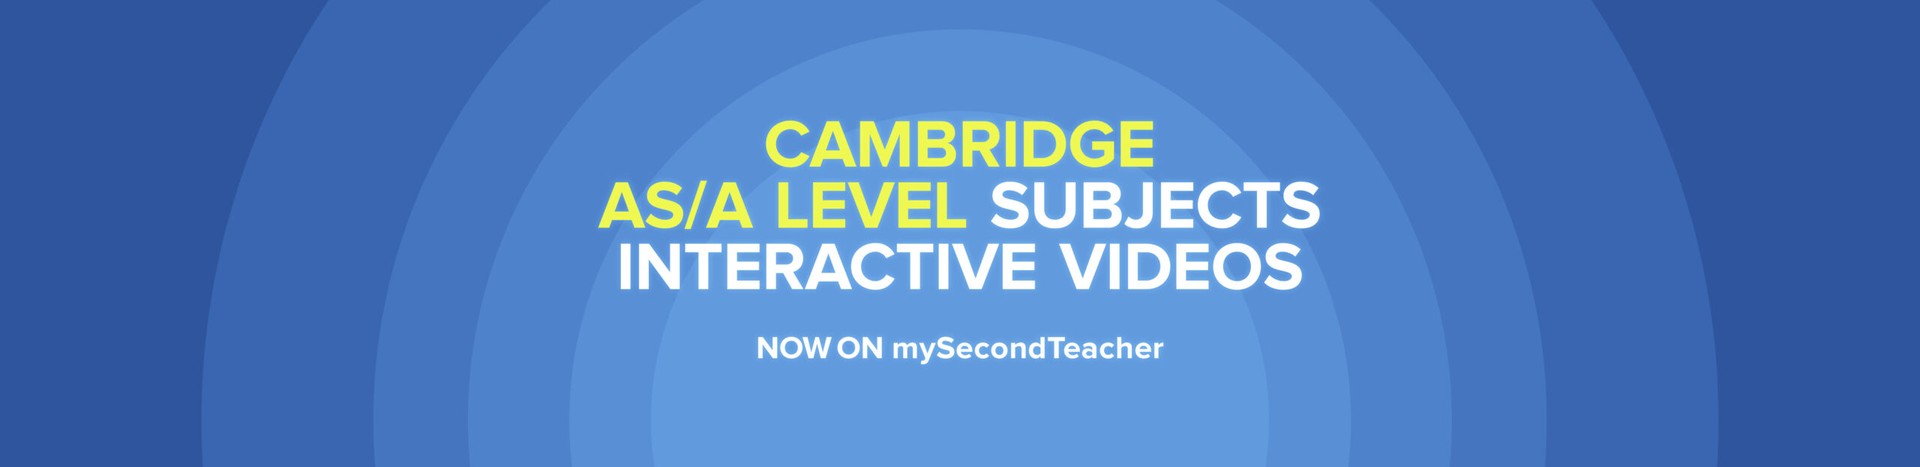 Advanced Pedagogy Announces Release of Interactive Learning Video Series for six Cambridge AS/A Levels Subjects